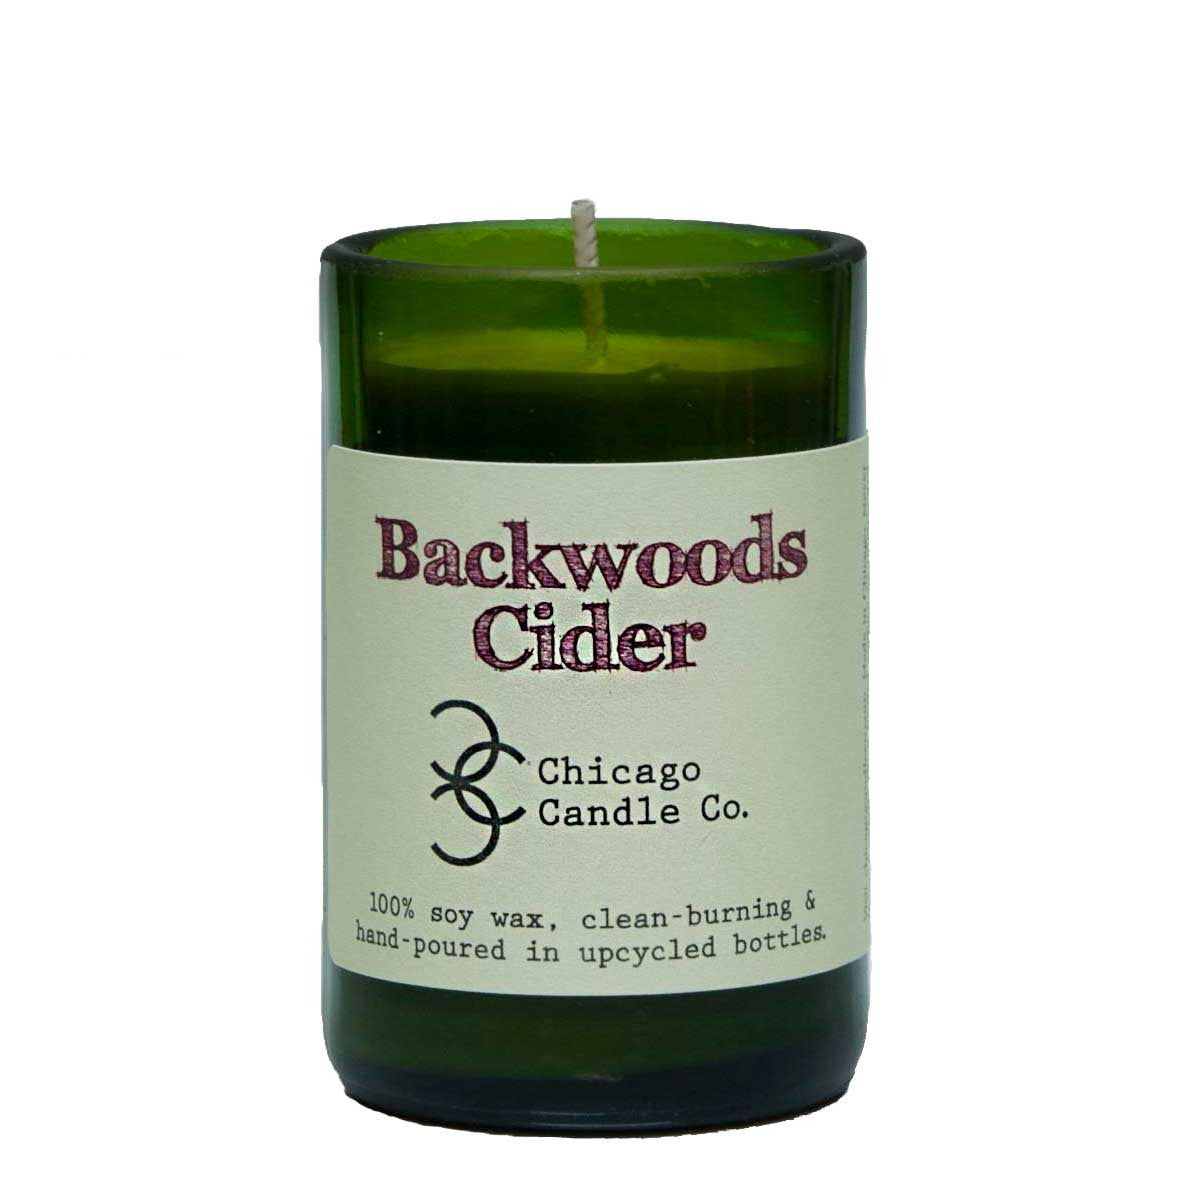 Chicago Candle Co. - Backwoods Cider Candle - Mini